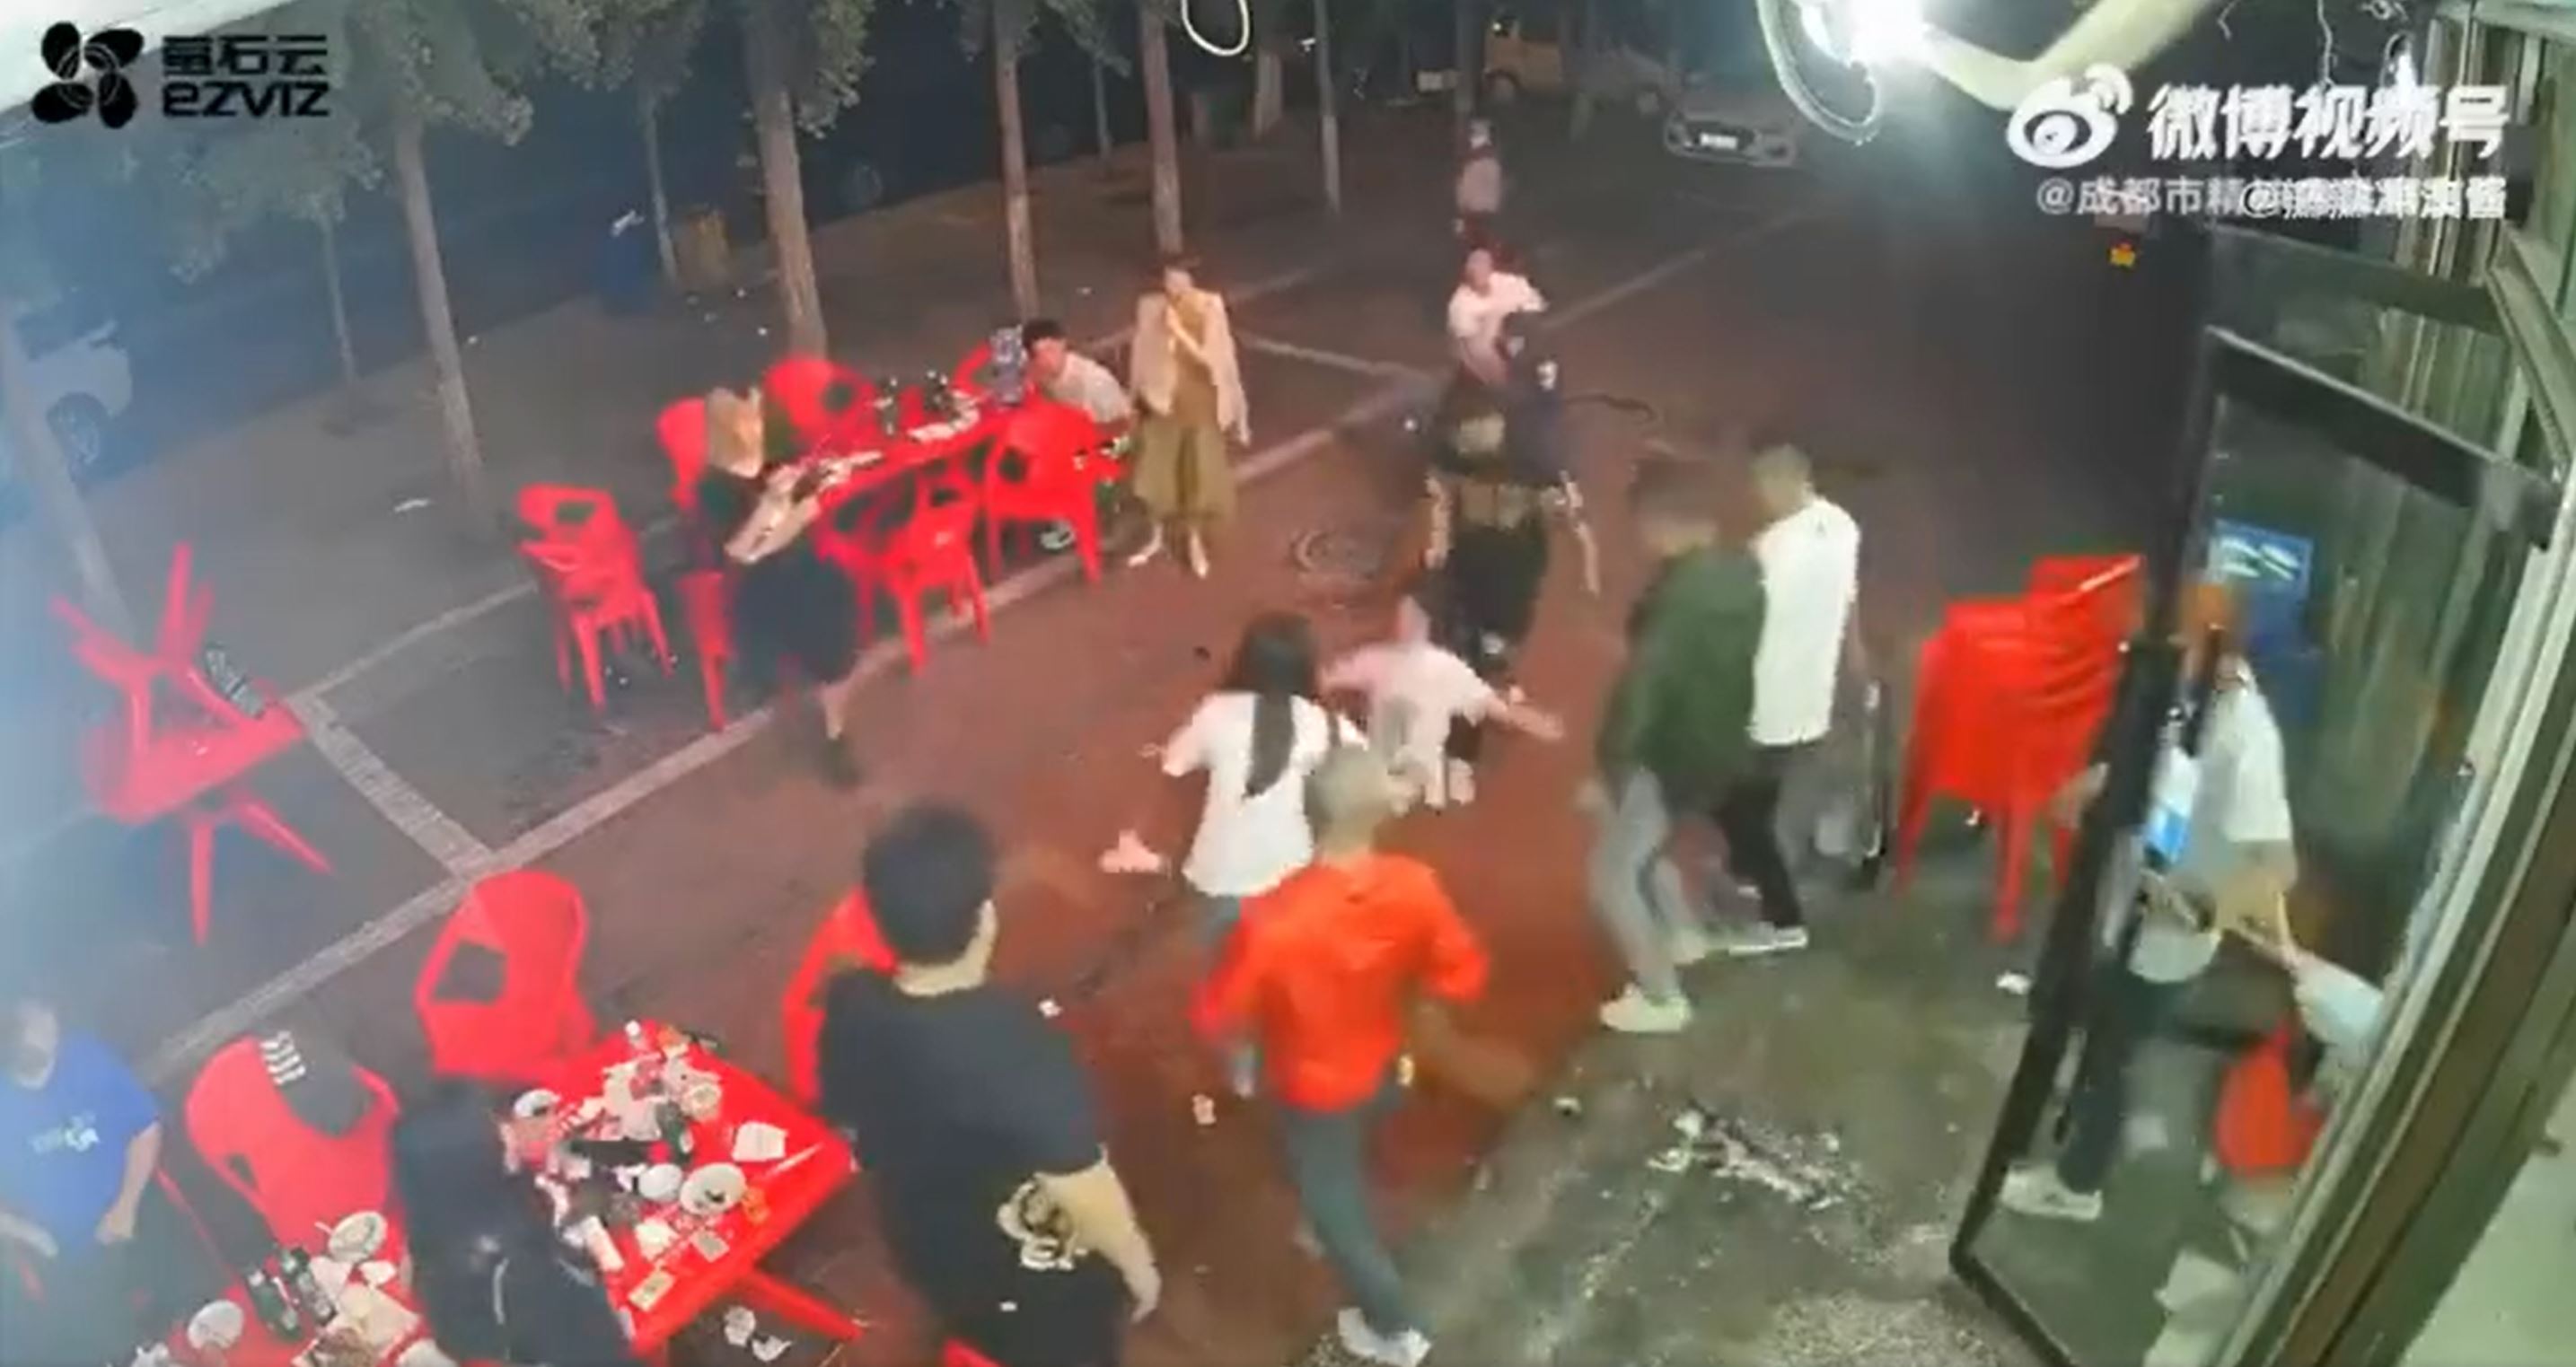 Sex Video School Rep China - Ringleader in Tangshan Attack on Chinese Women Jailed for 24 Years -  Bloomberg